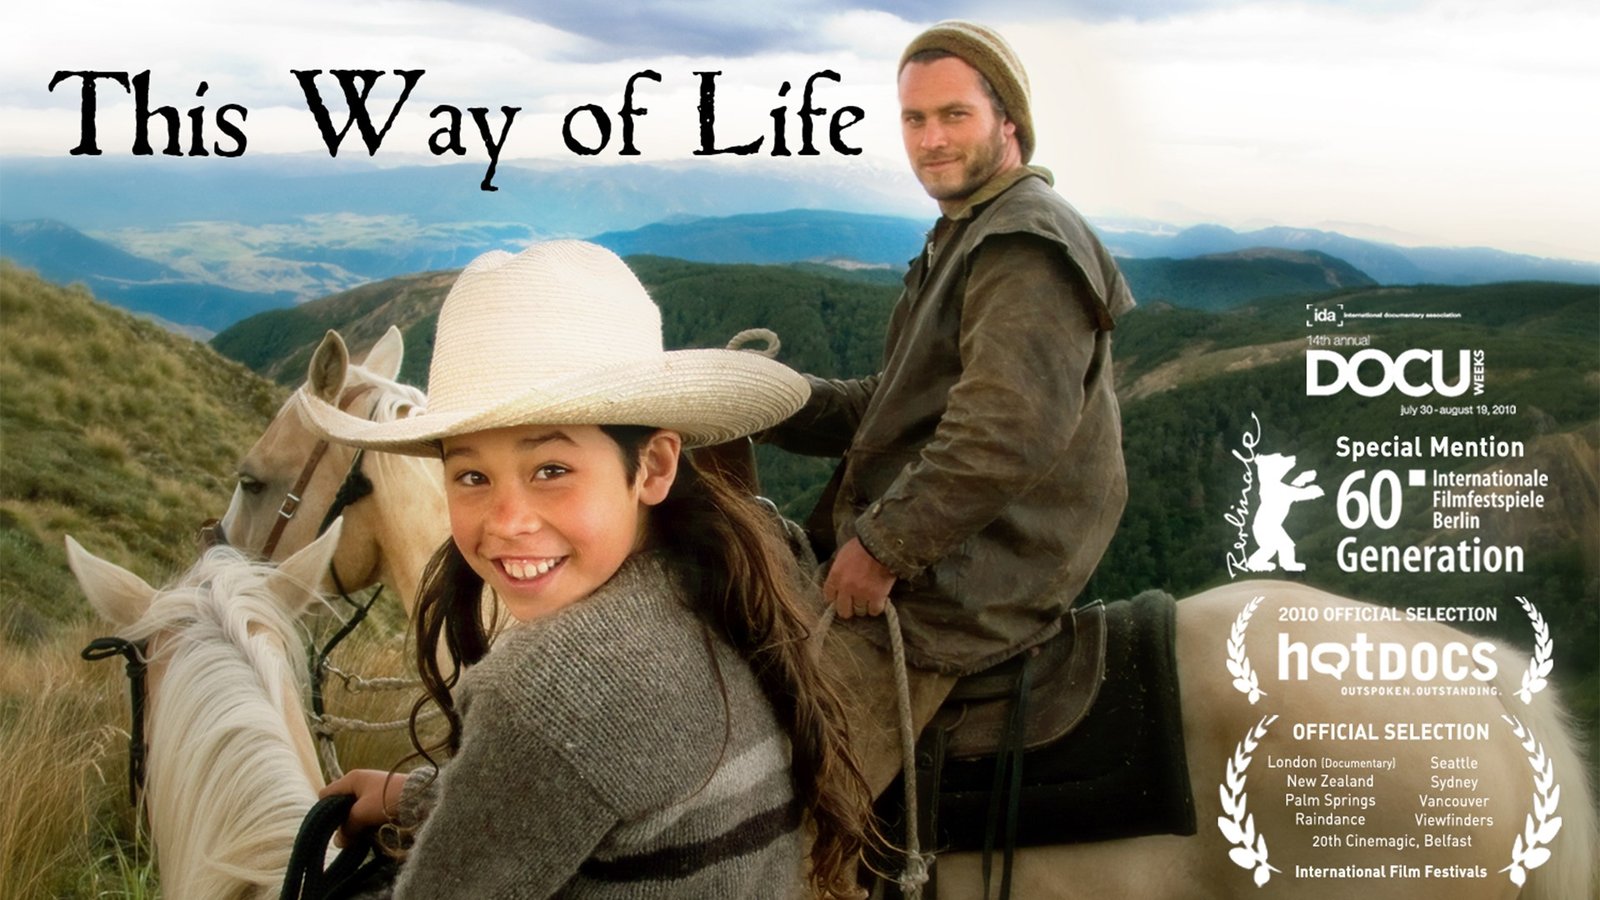 This Way of Life - The Story of a Family in New Zealand